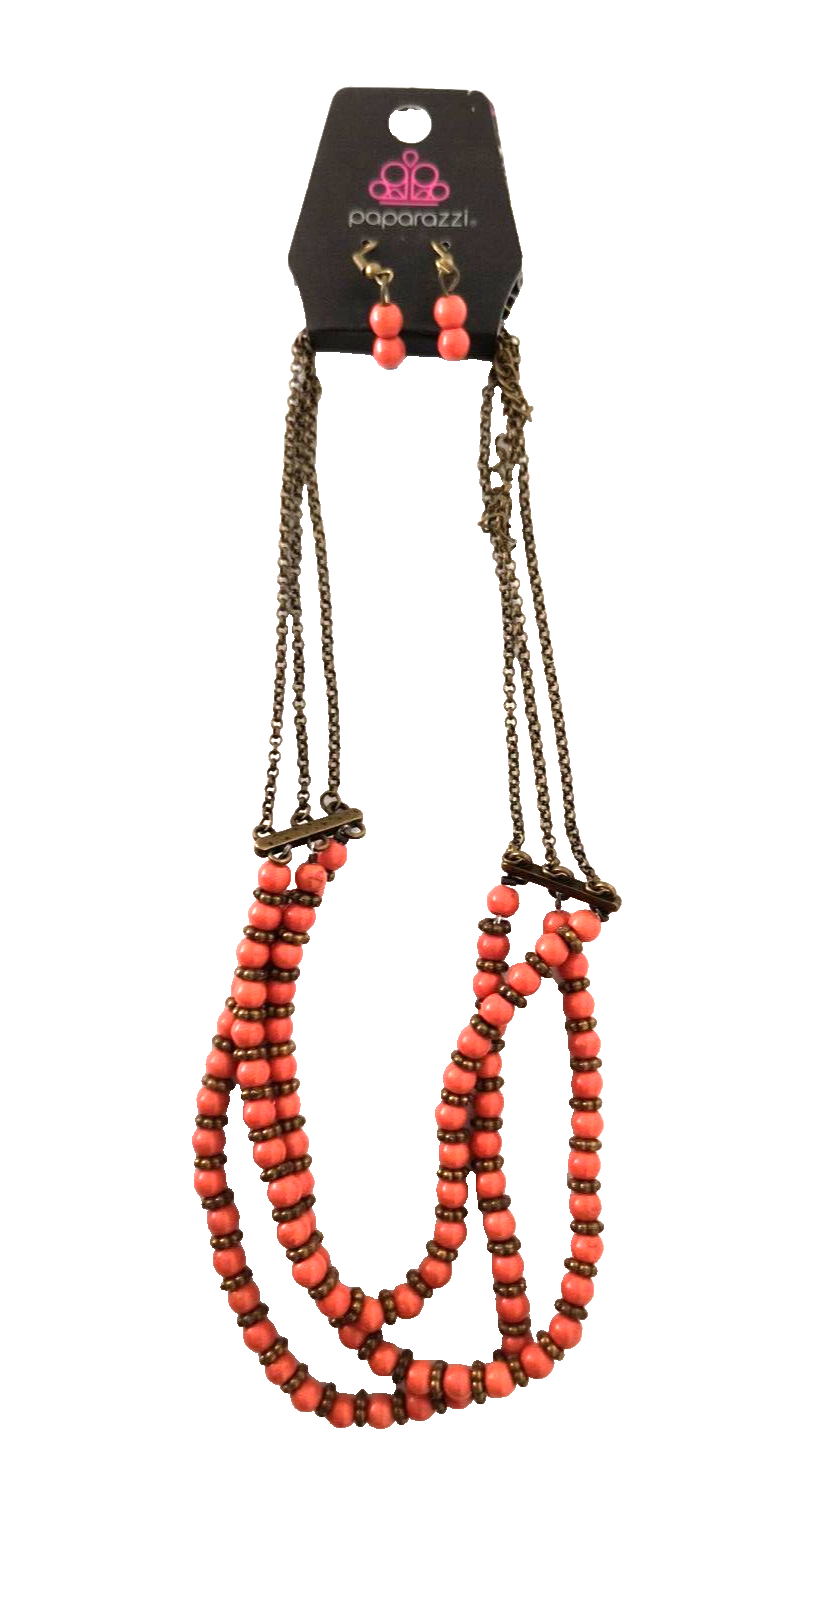 Paparazzi Necklace and Earring Set Coral Beads Bronze Color Spacers and Chains - $11.88